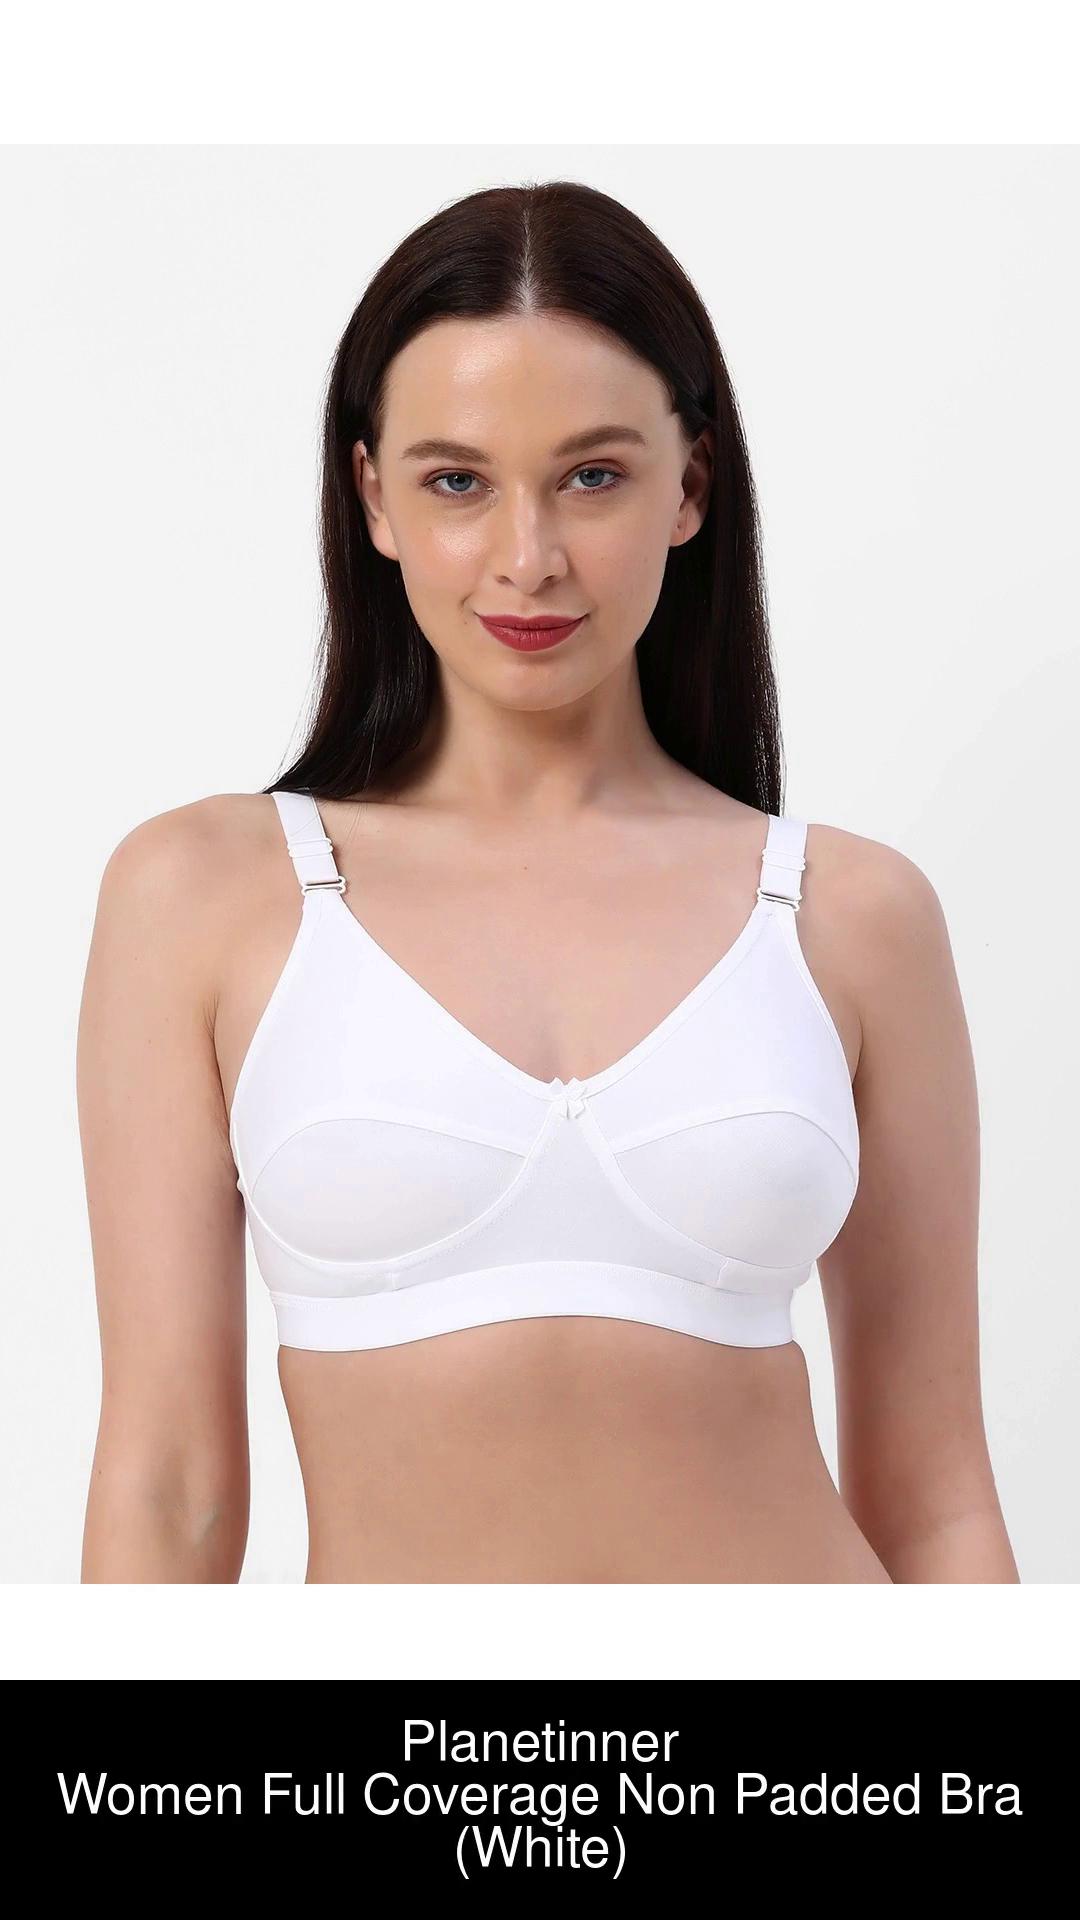 Planetinner Pack of Full Coverage Non-Padded Wirefree Minimizer bra Women  Everyday Non Padded Bra - Buy Planetinner Pack of Full Coverage Non-Padded  Wirefree Minimizer bra Women Everyday Non Padded Bra Online at